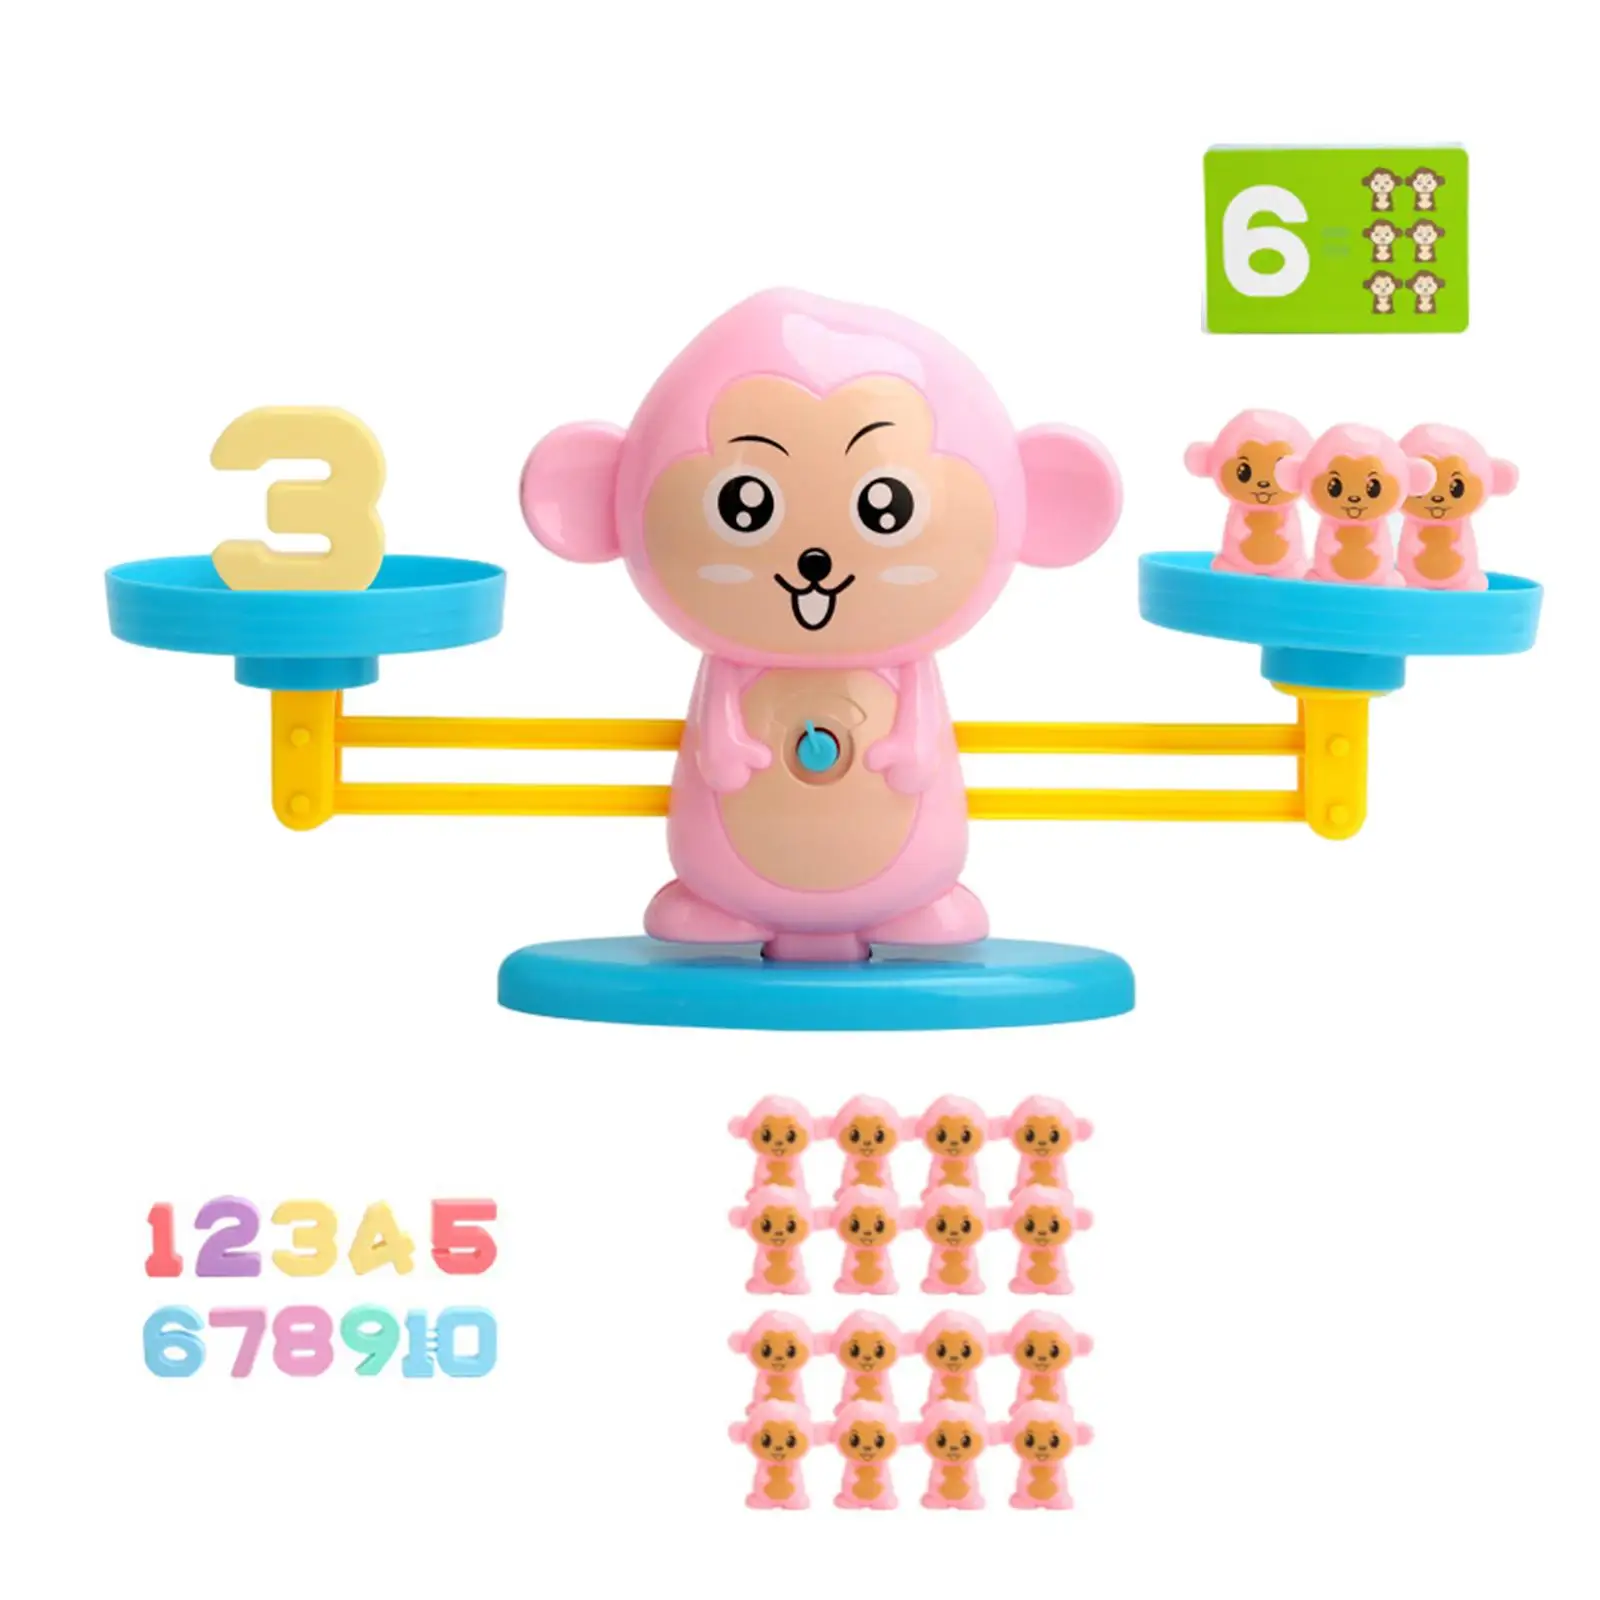 Balance Math Game Balance Scales Children`s Birthday Gifts Balance Game Toy Balance Counting Toys Children 3 4 5 Year Olds Kids